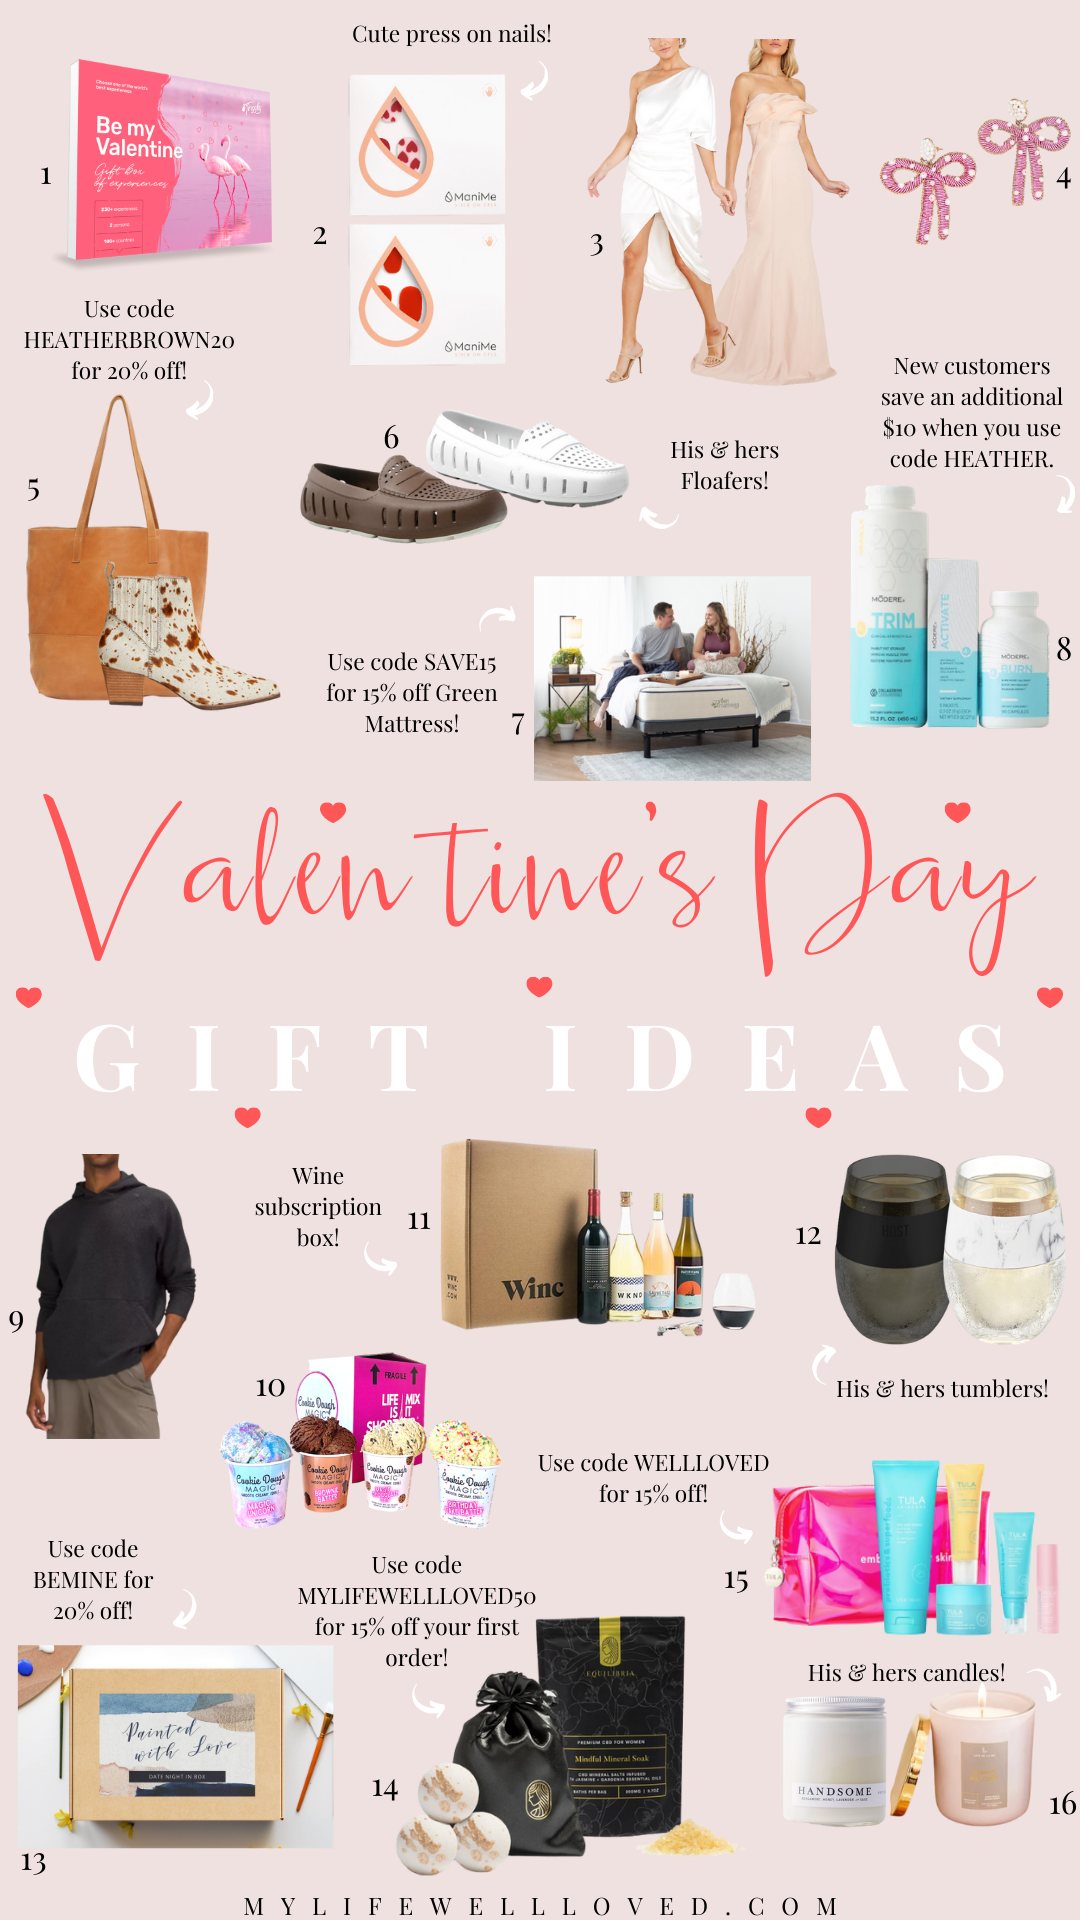 My Favorite Things Valentine Gift Guide - Send it to your husband